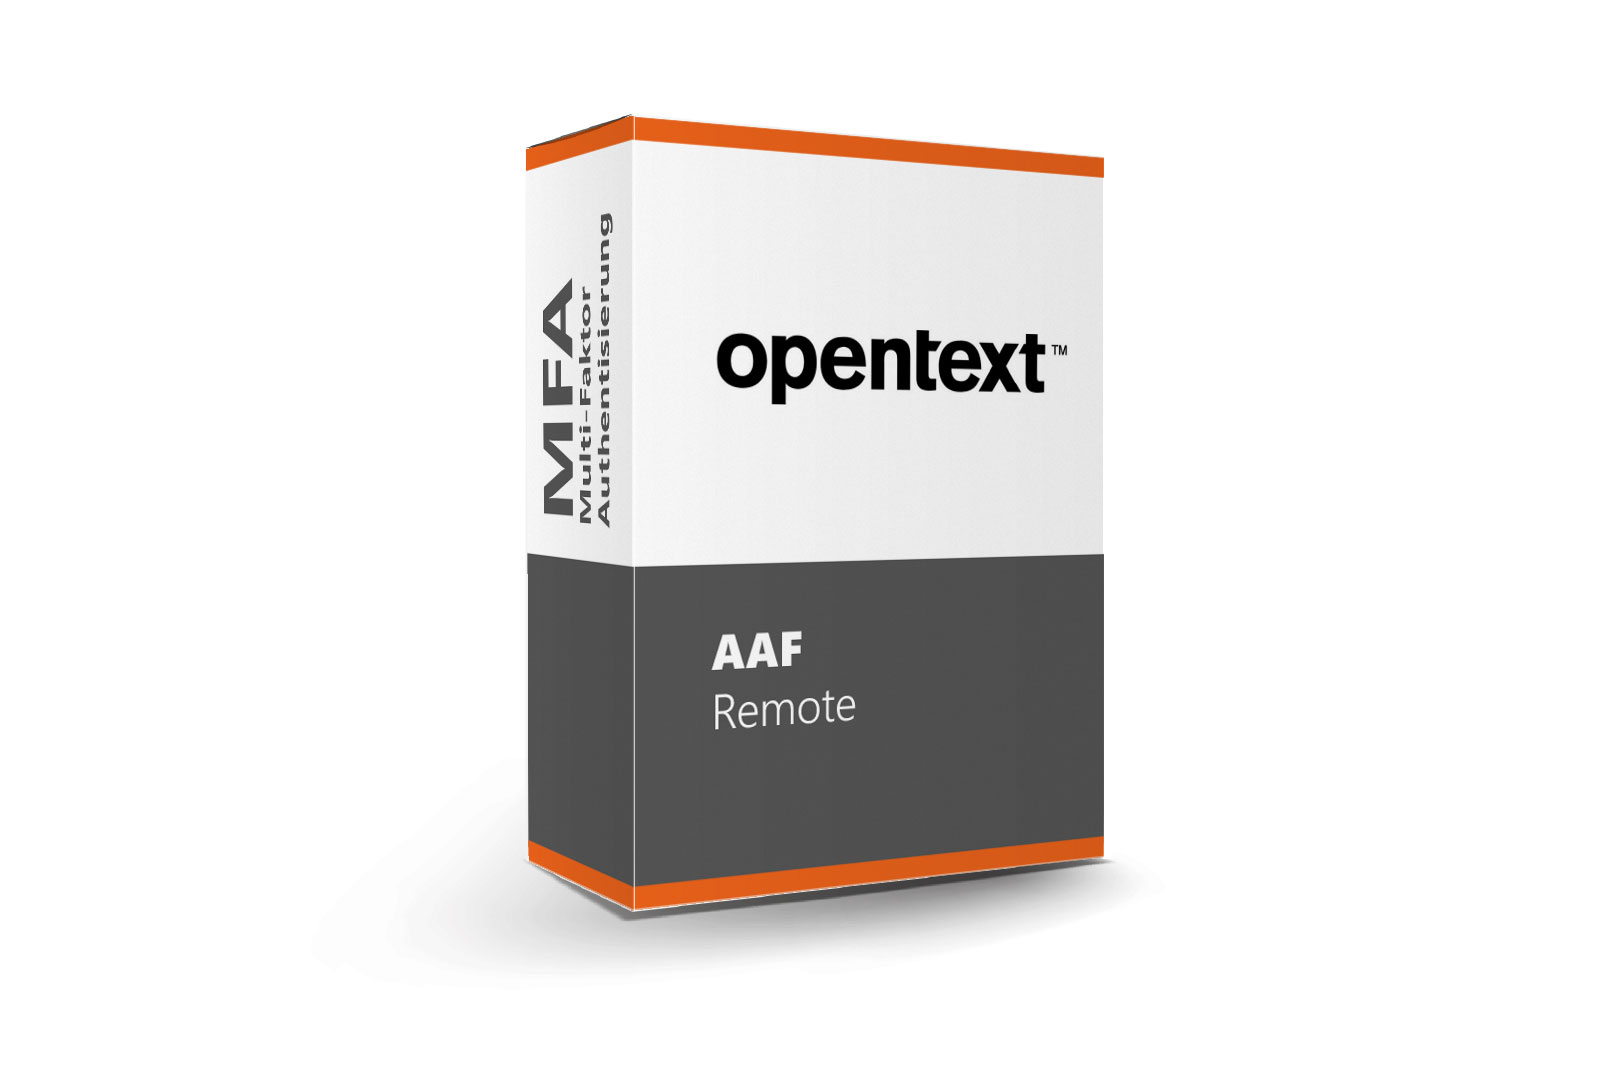 Mockup-Packaging-Opentext-Remote